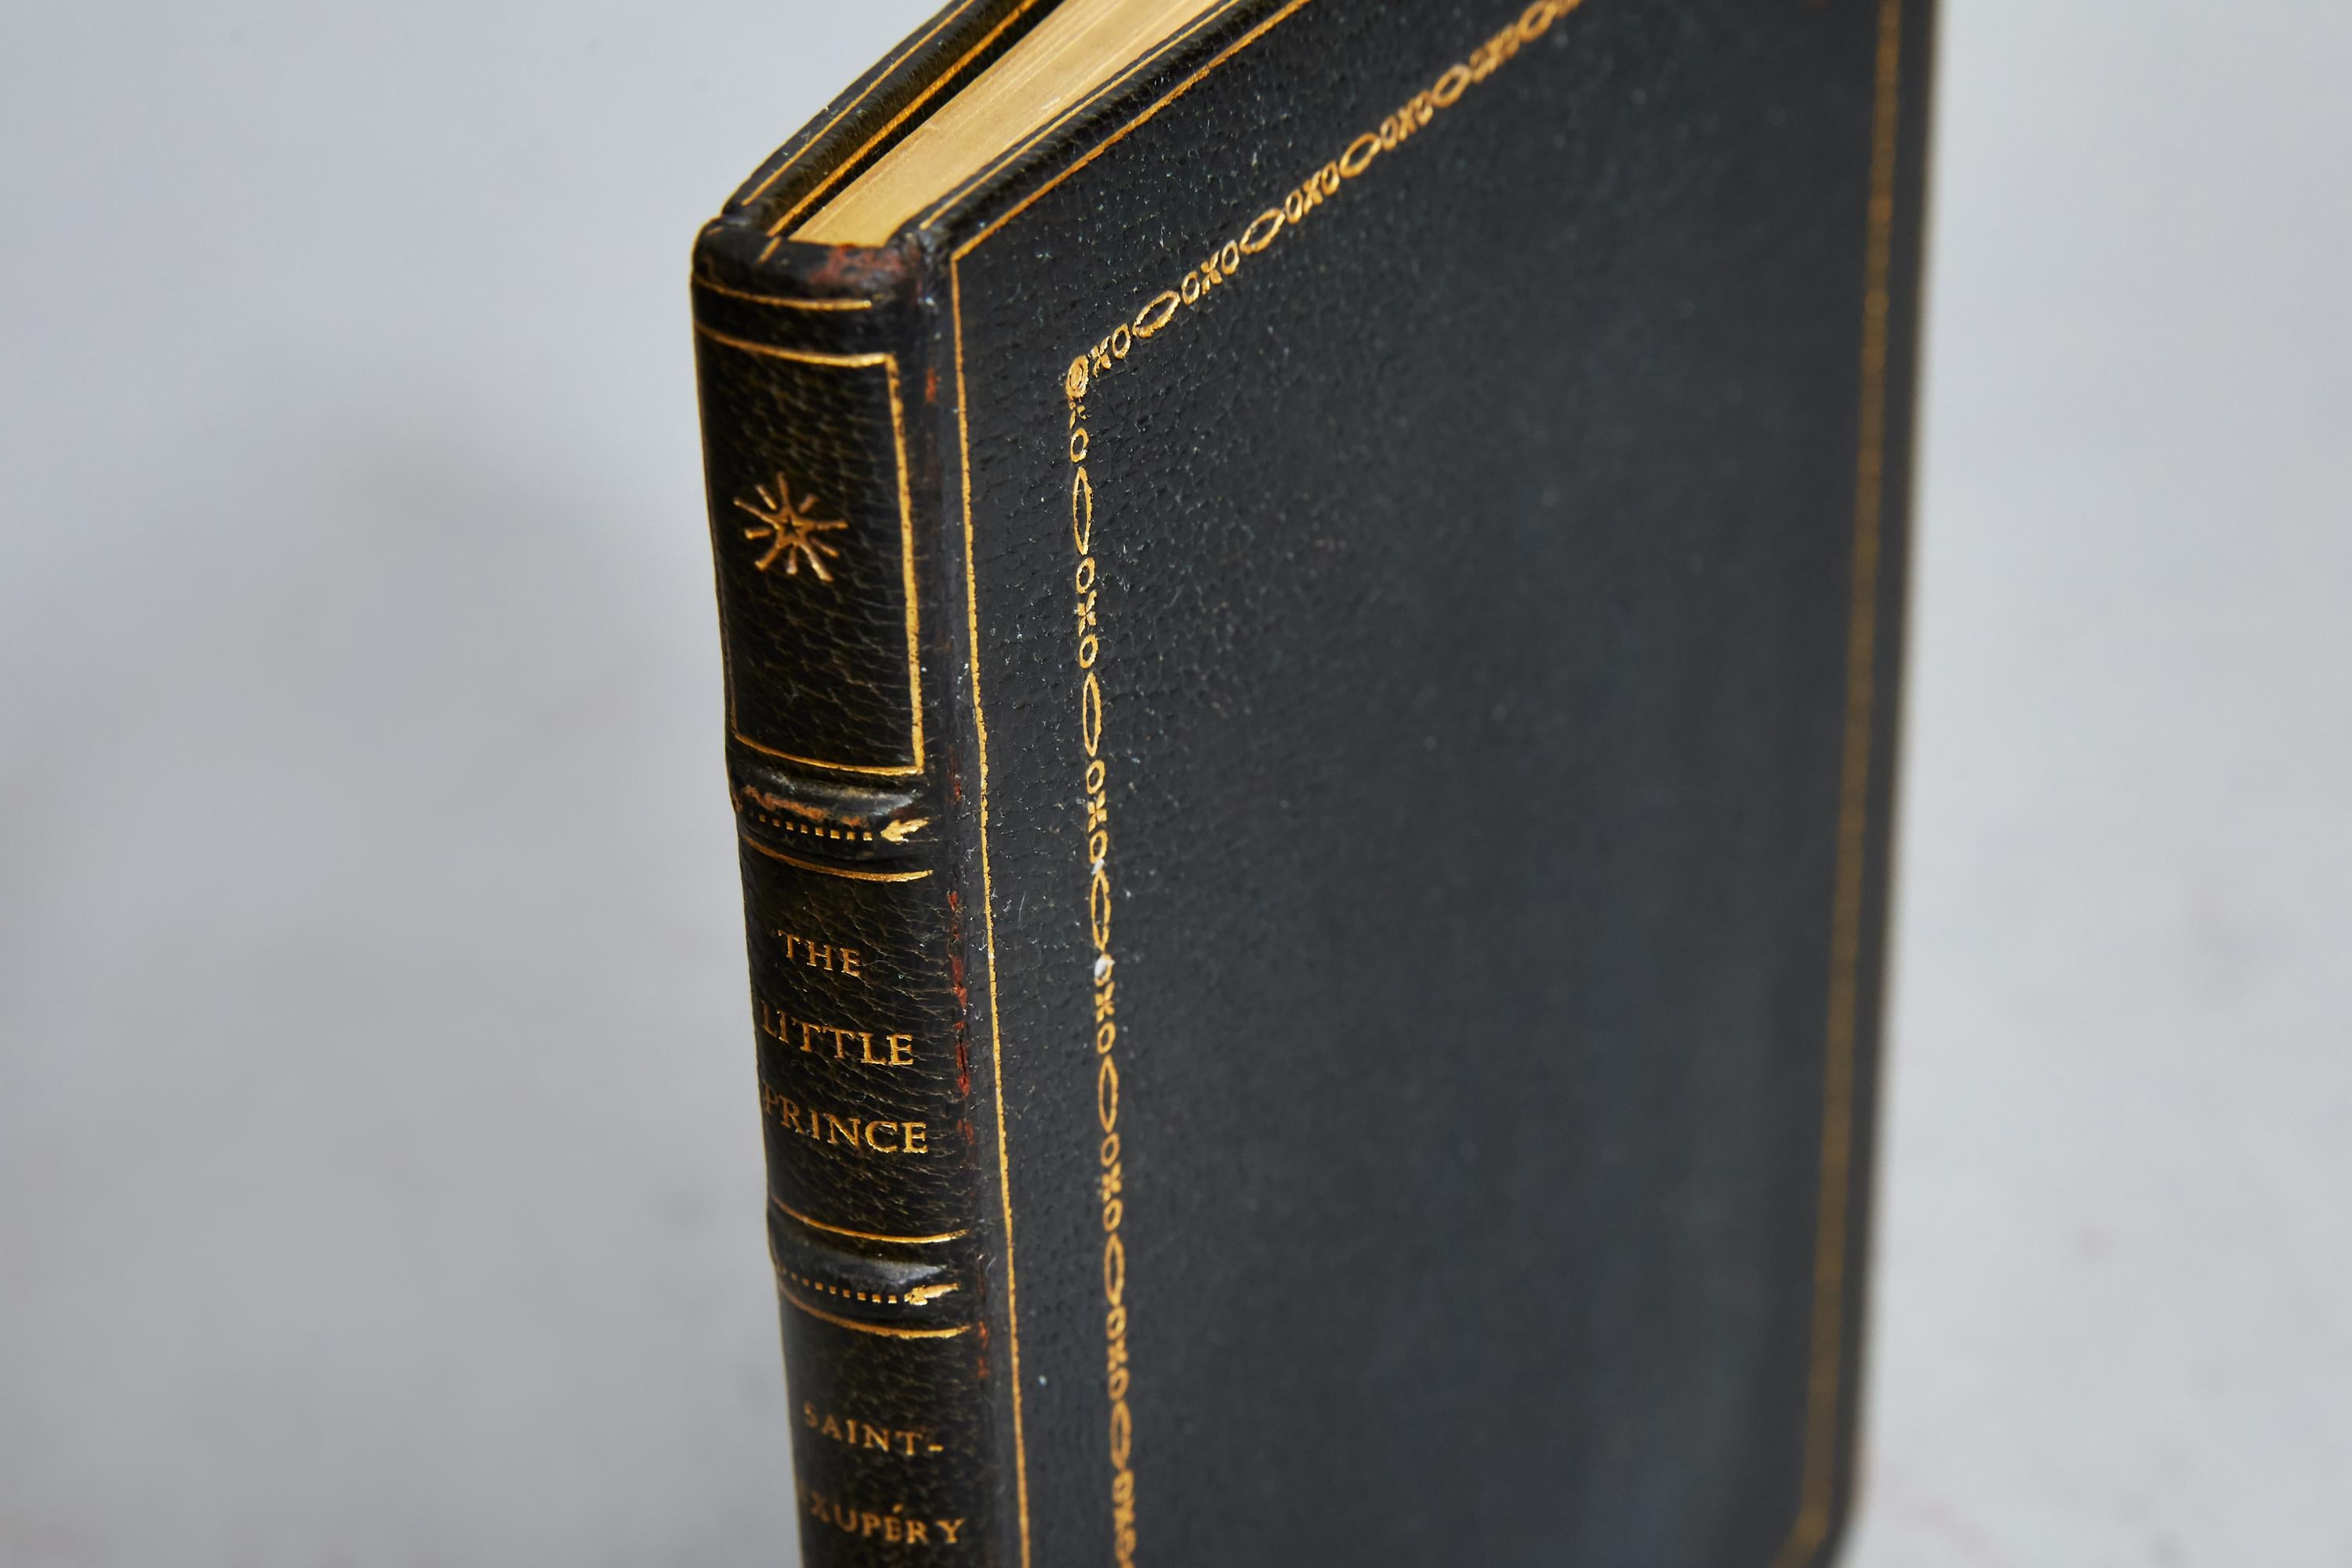 1 volume

Translated from the French by Katherine Woods. Rebound in full blue Morocco by Sangorski and Sutcliffe, all edges gilt, raised bands, gilt panels. 

Published: New York, Harcourt, Brace & Co. 1943.
 